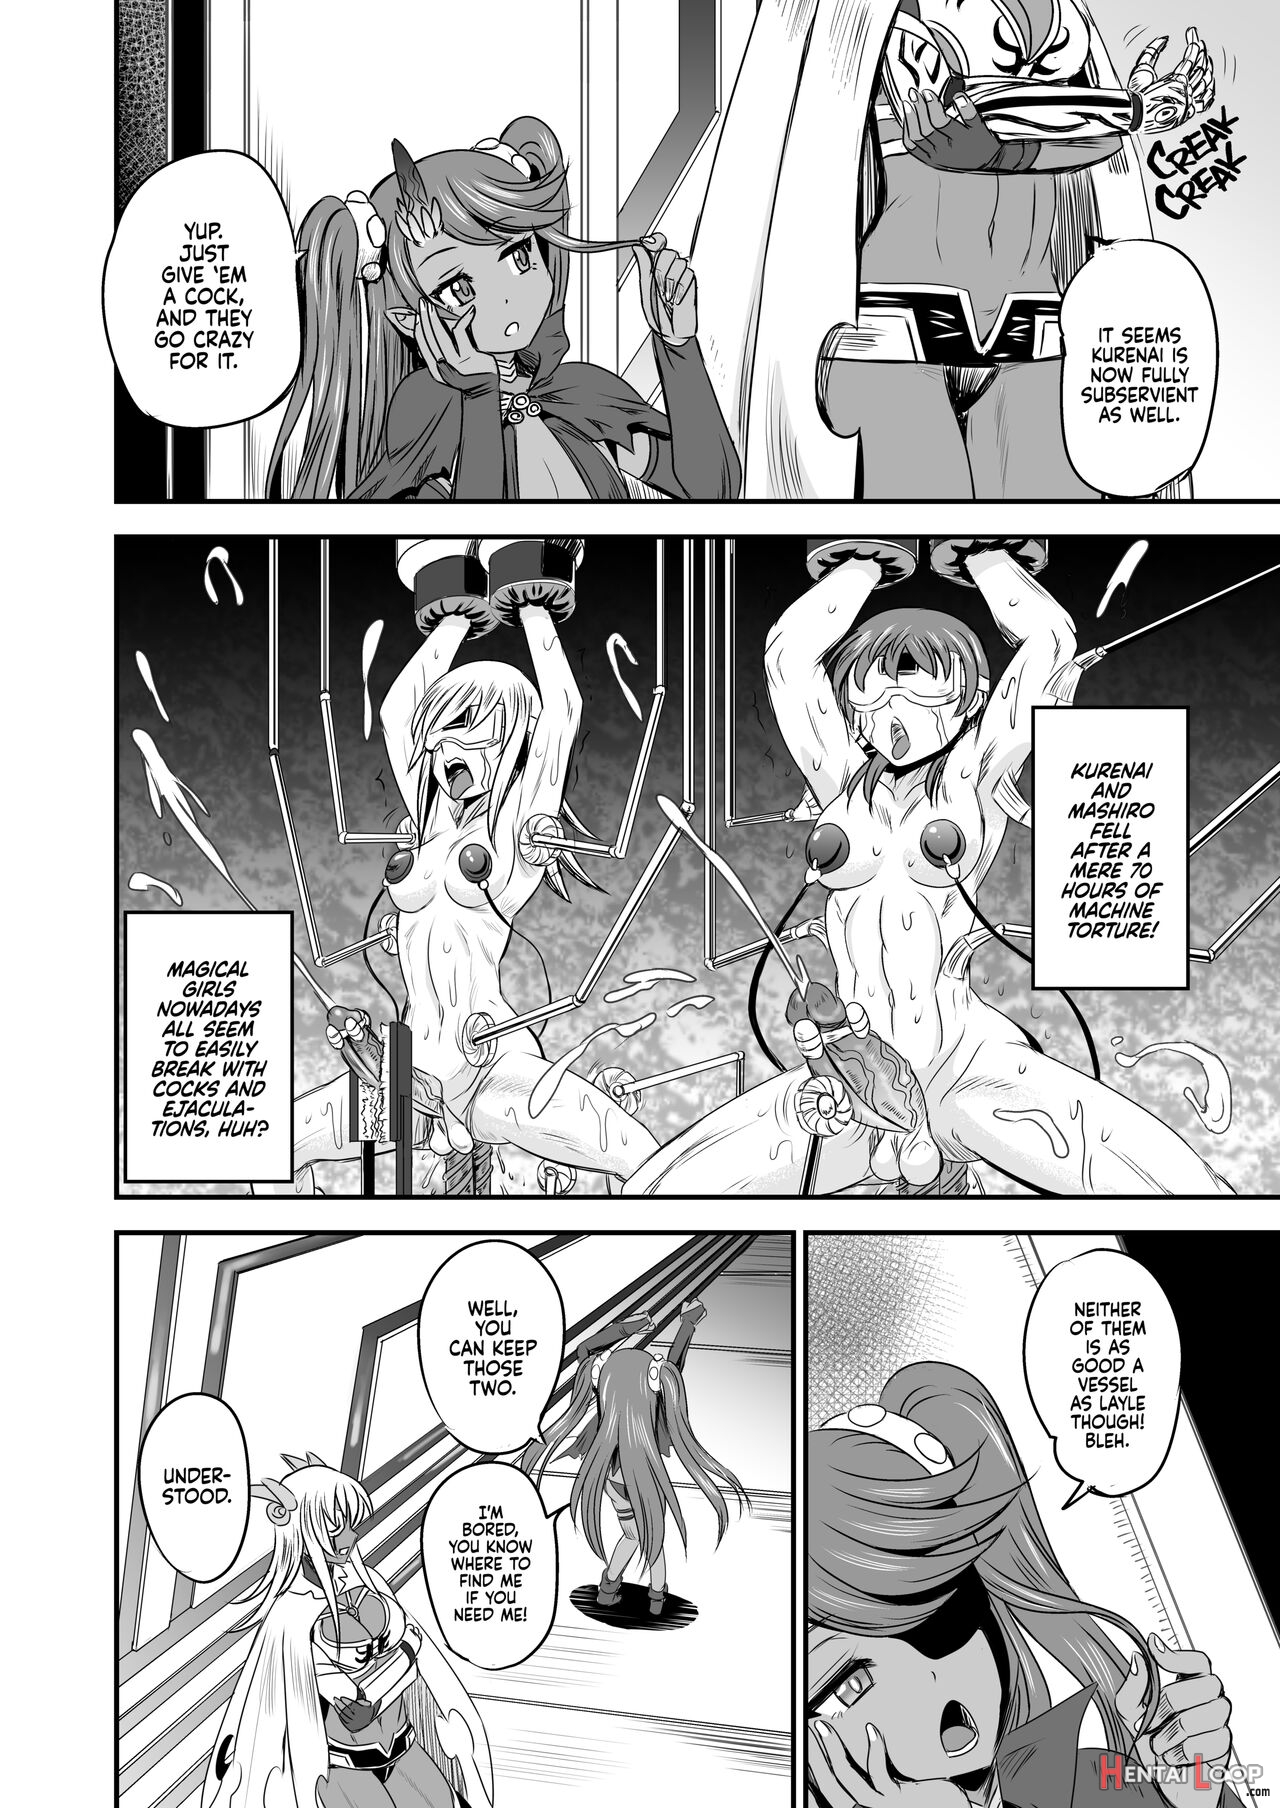 Magical Girl Semen Training System 6 page 9